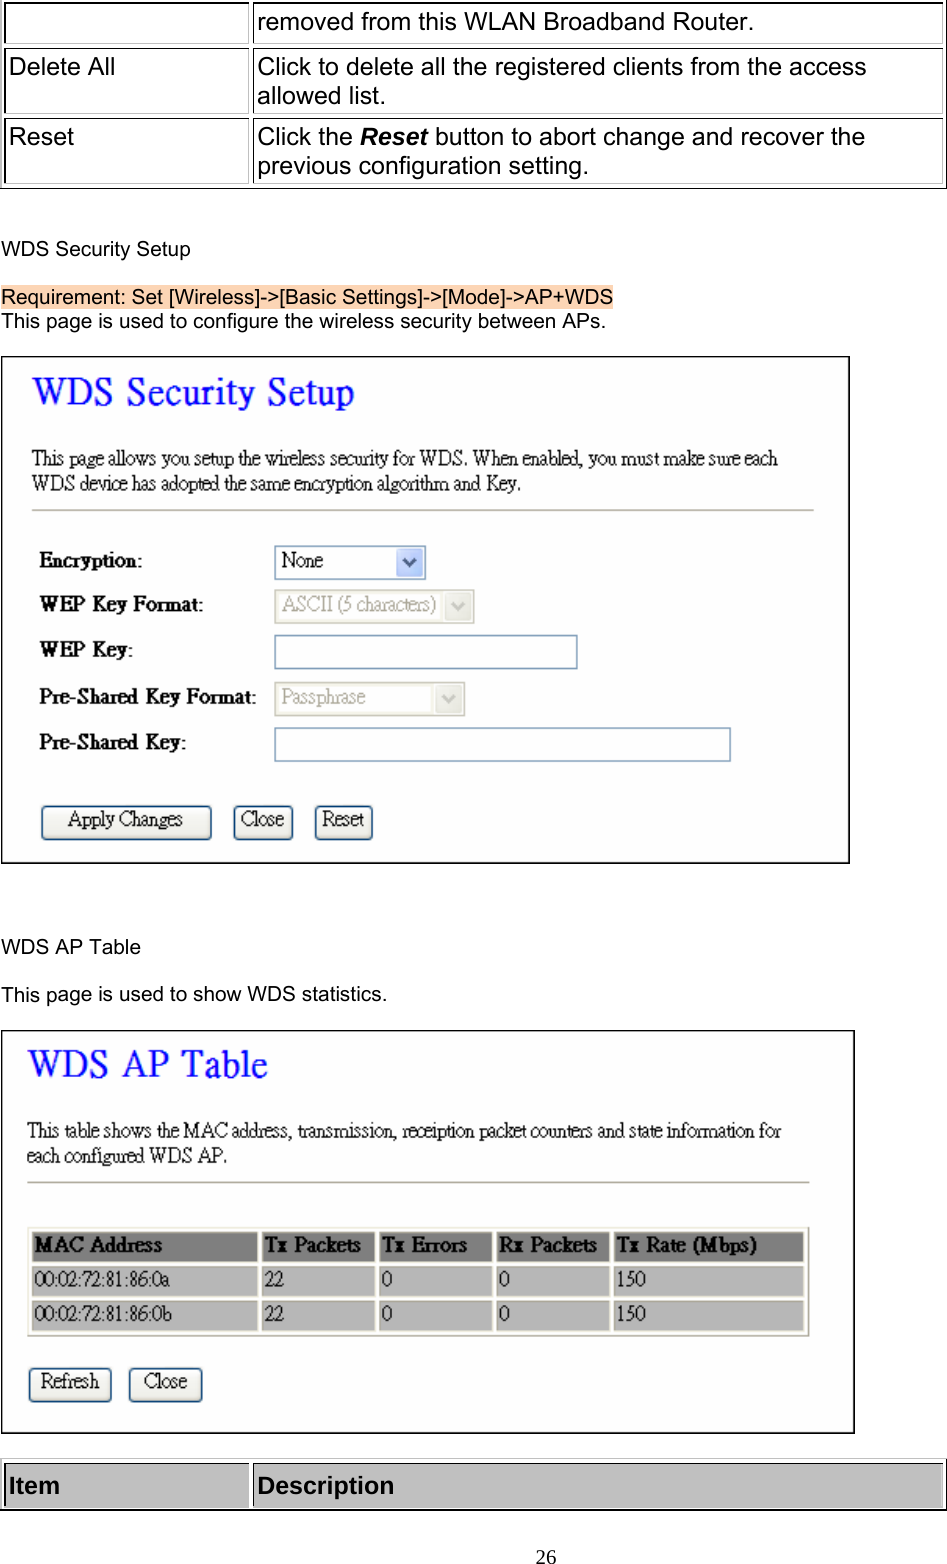 removed from this WLAN Broadband Router. Delete All  Click to delete all the registered clients from the access allowed list. Reset Click the Reset button to abort change and recover the previous configuration setting.   WDS Security Setup  Requirement: Set [Wireless]-&gt;[Basic Settings]-&gt;[Mode]-&gt;AP+WDS This page is used to configure the wireless security between APs.      WDS AP Table  This page is used to show WDS statistics.    Item  Description     26